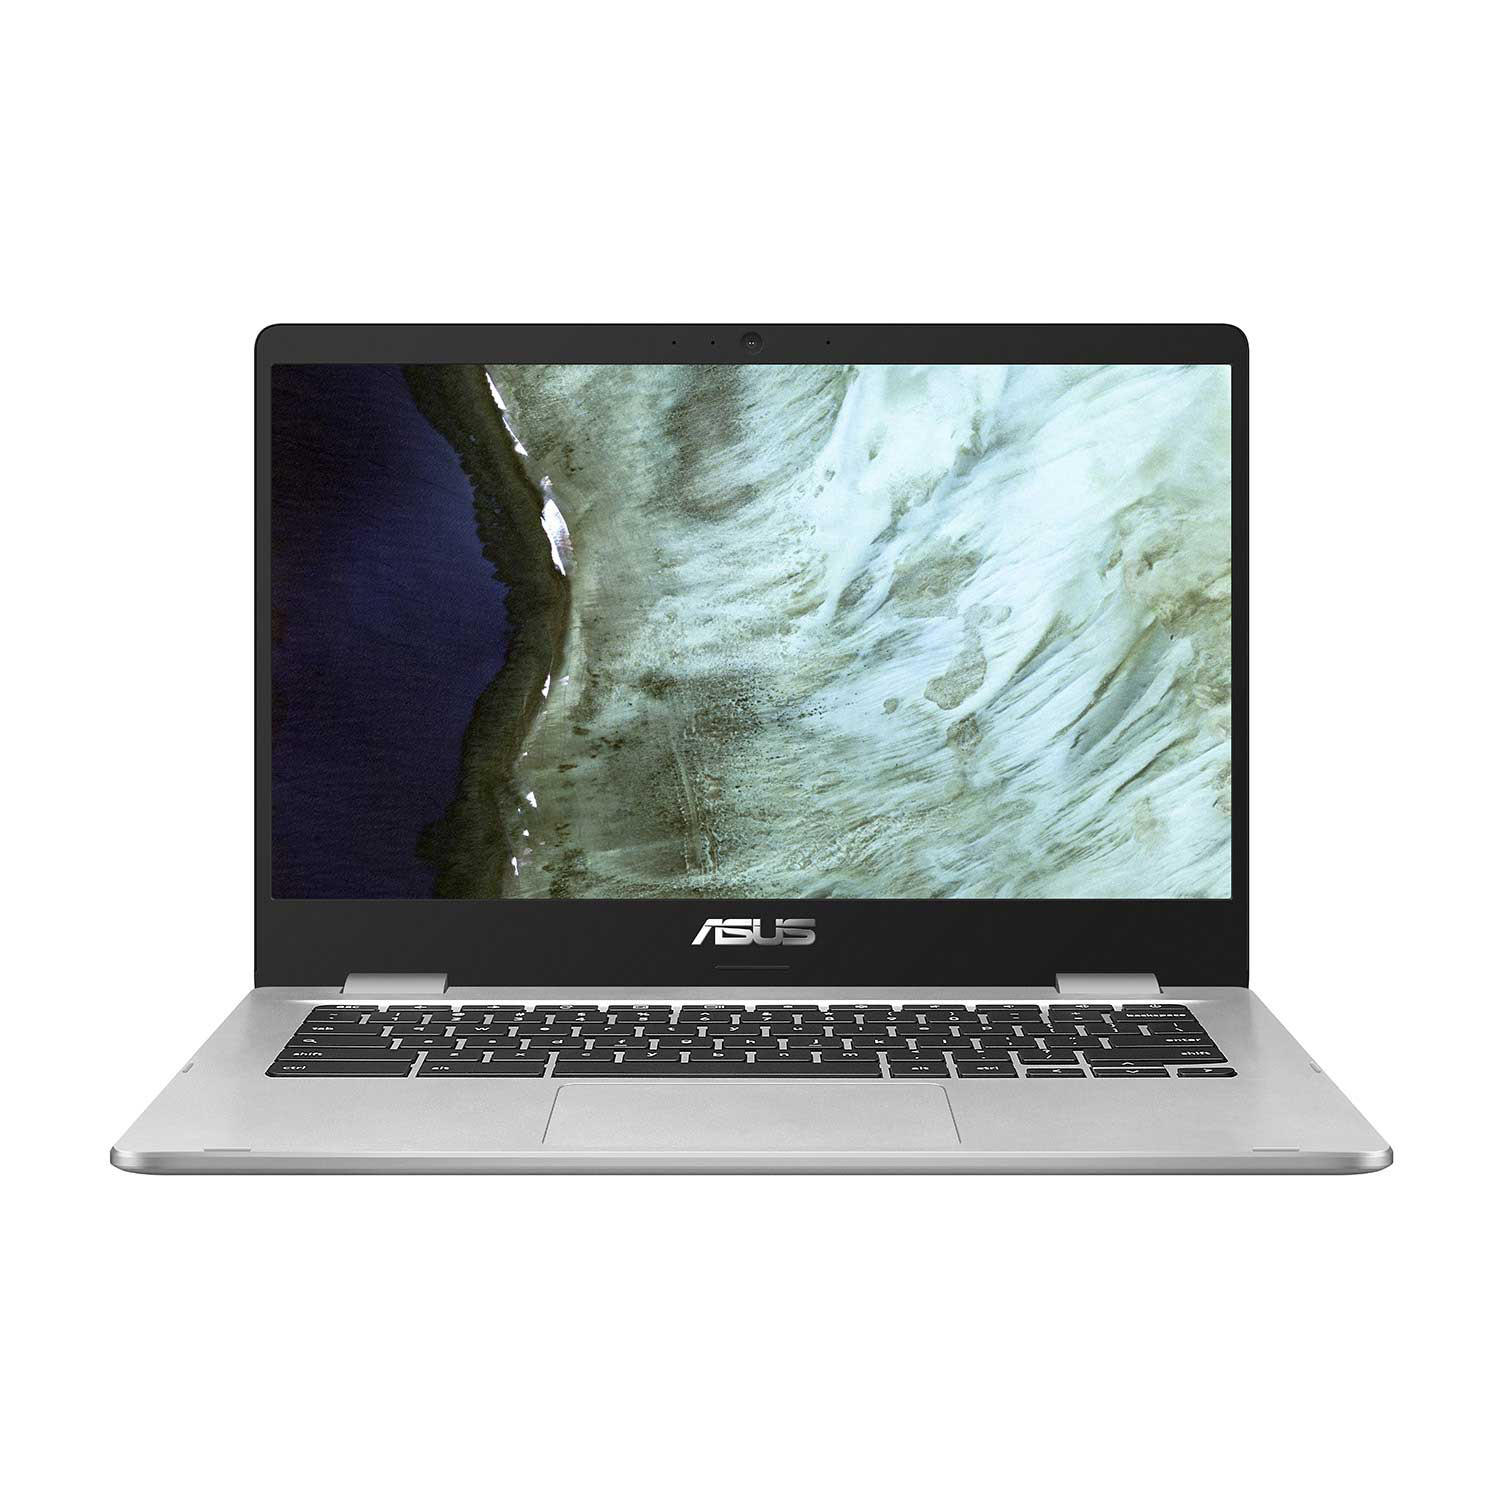 Back to School Deal on Chromebook - Under $200!!